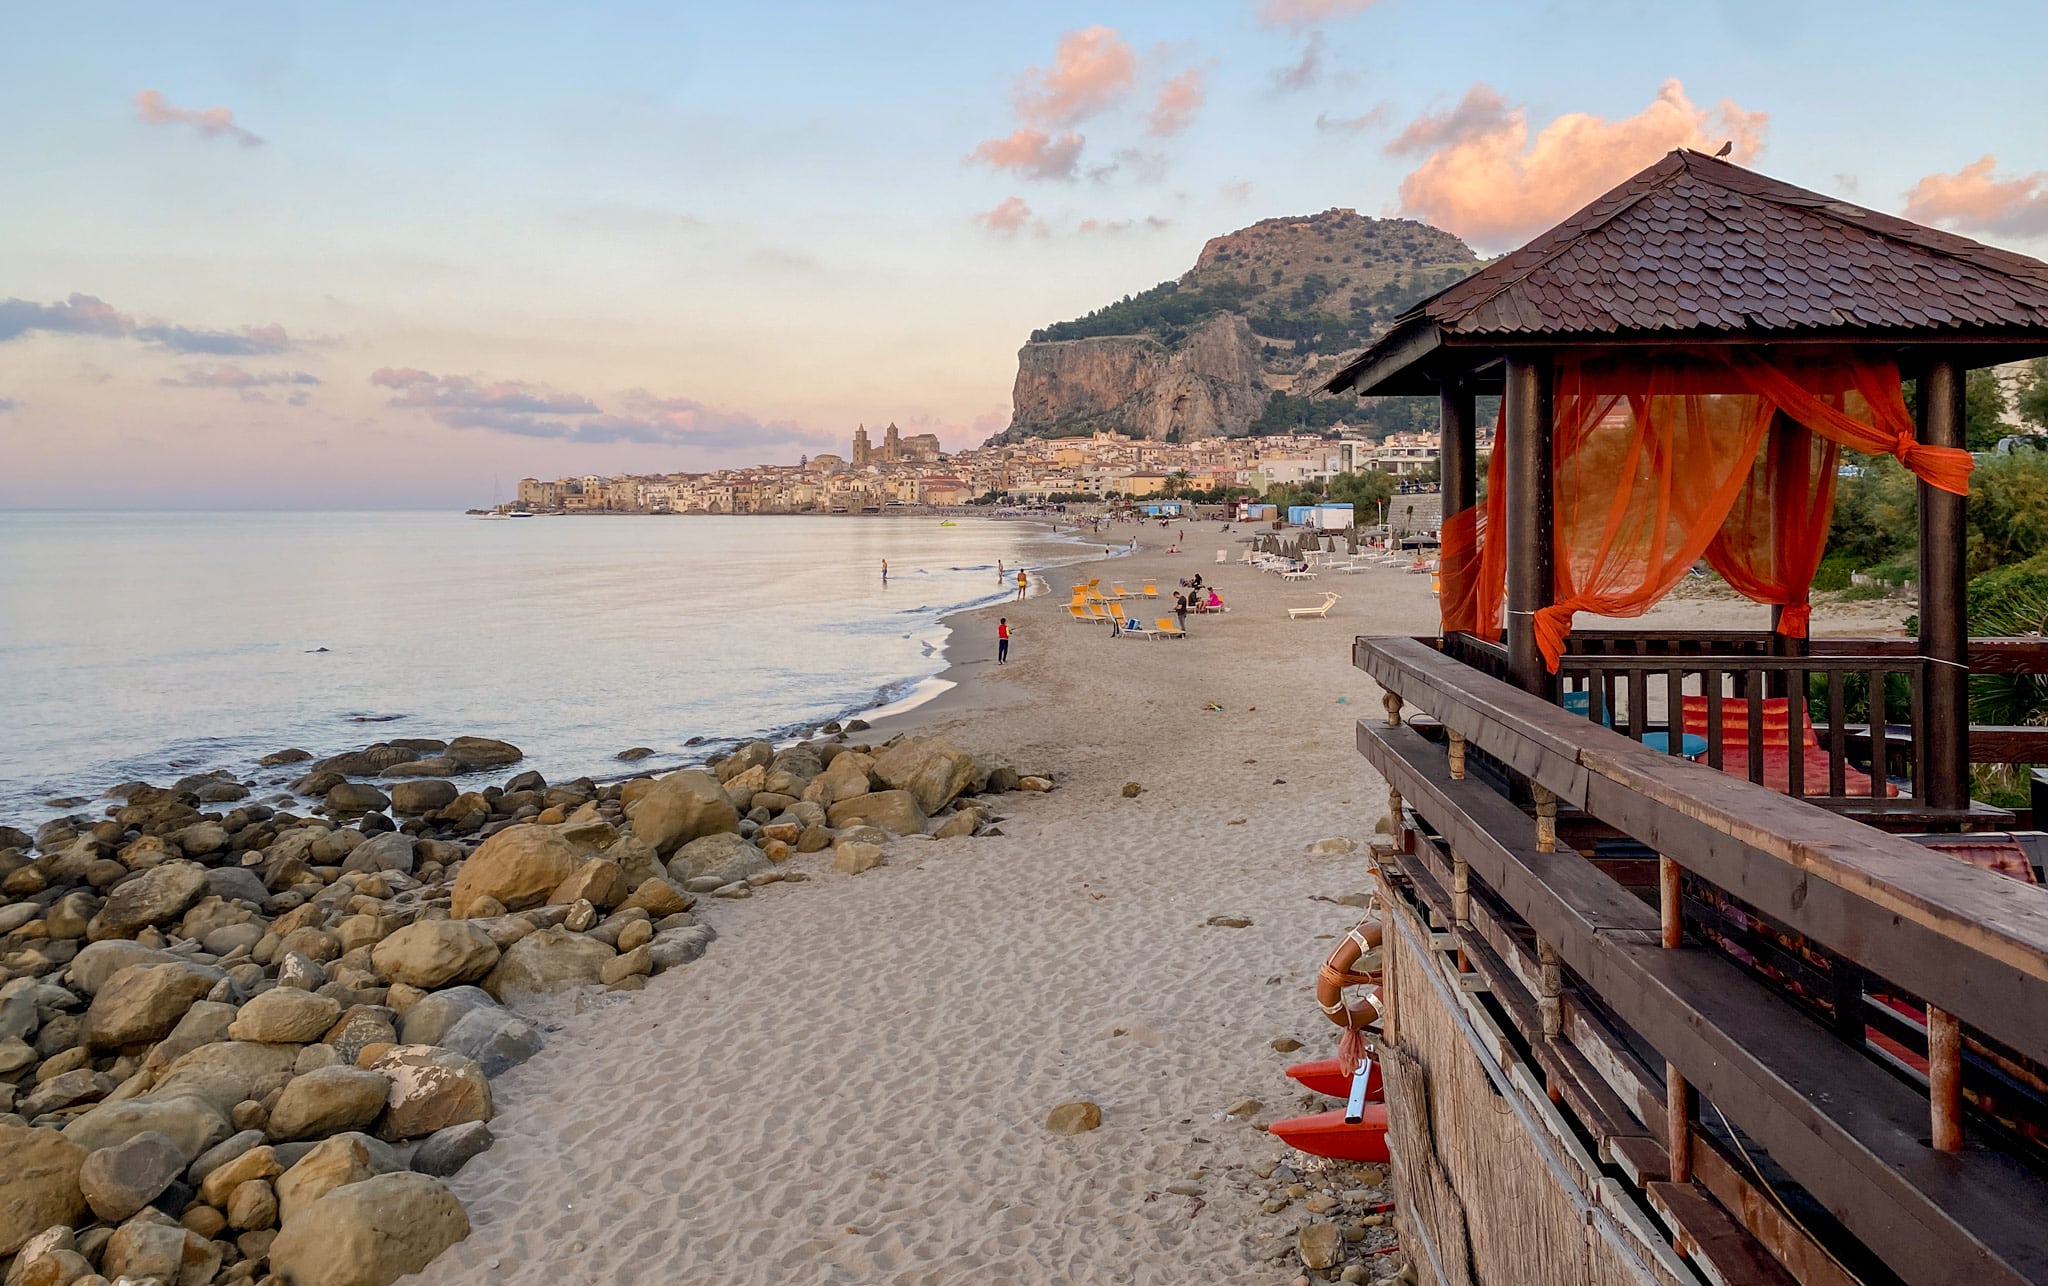 Cefalu is one of Italy's most cinematic towns